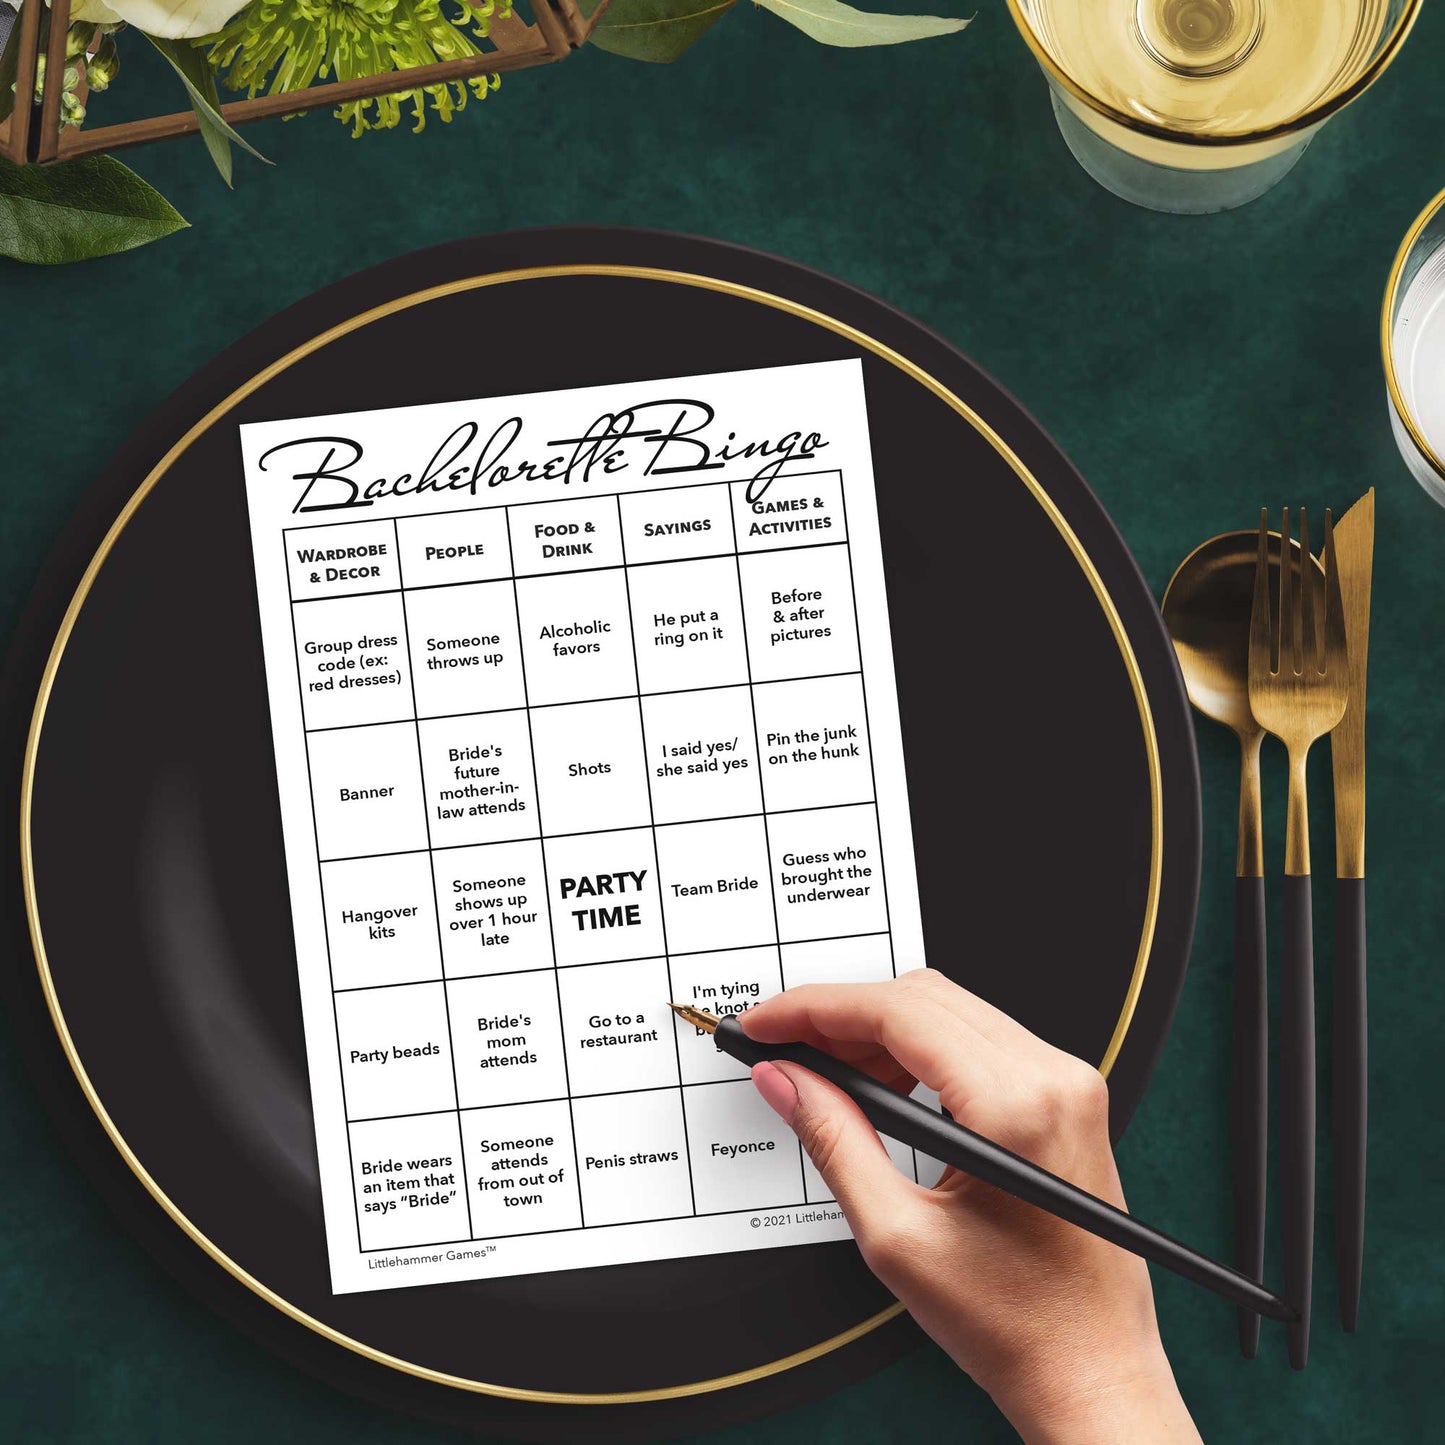 Woman with a pen sitting at a table with a black and white Bachelorette Bingo game card on a gold and black plate on a dark place setting